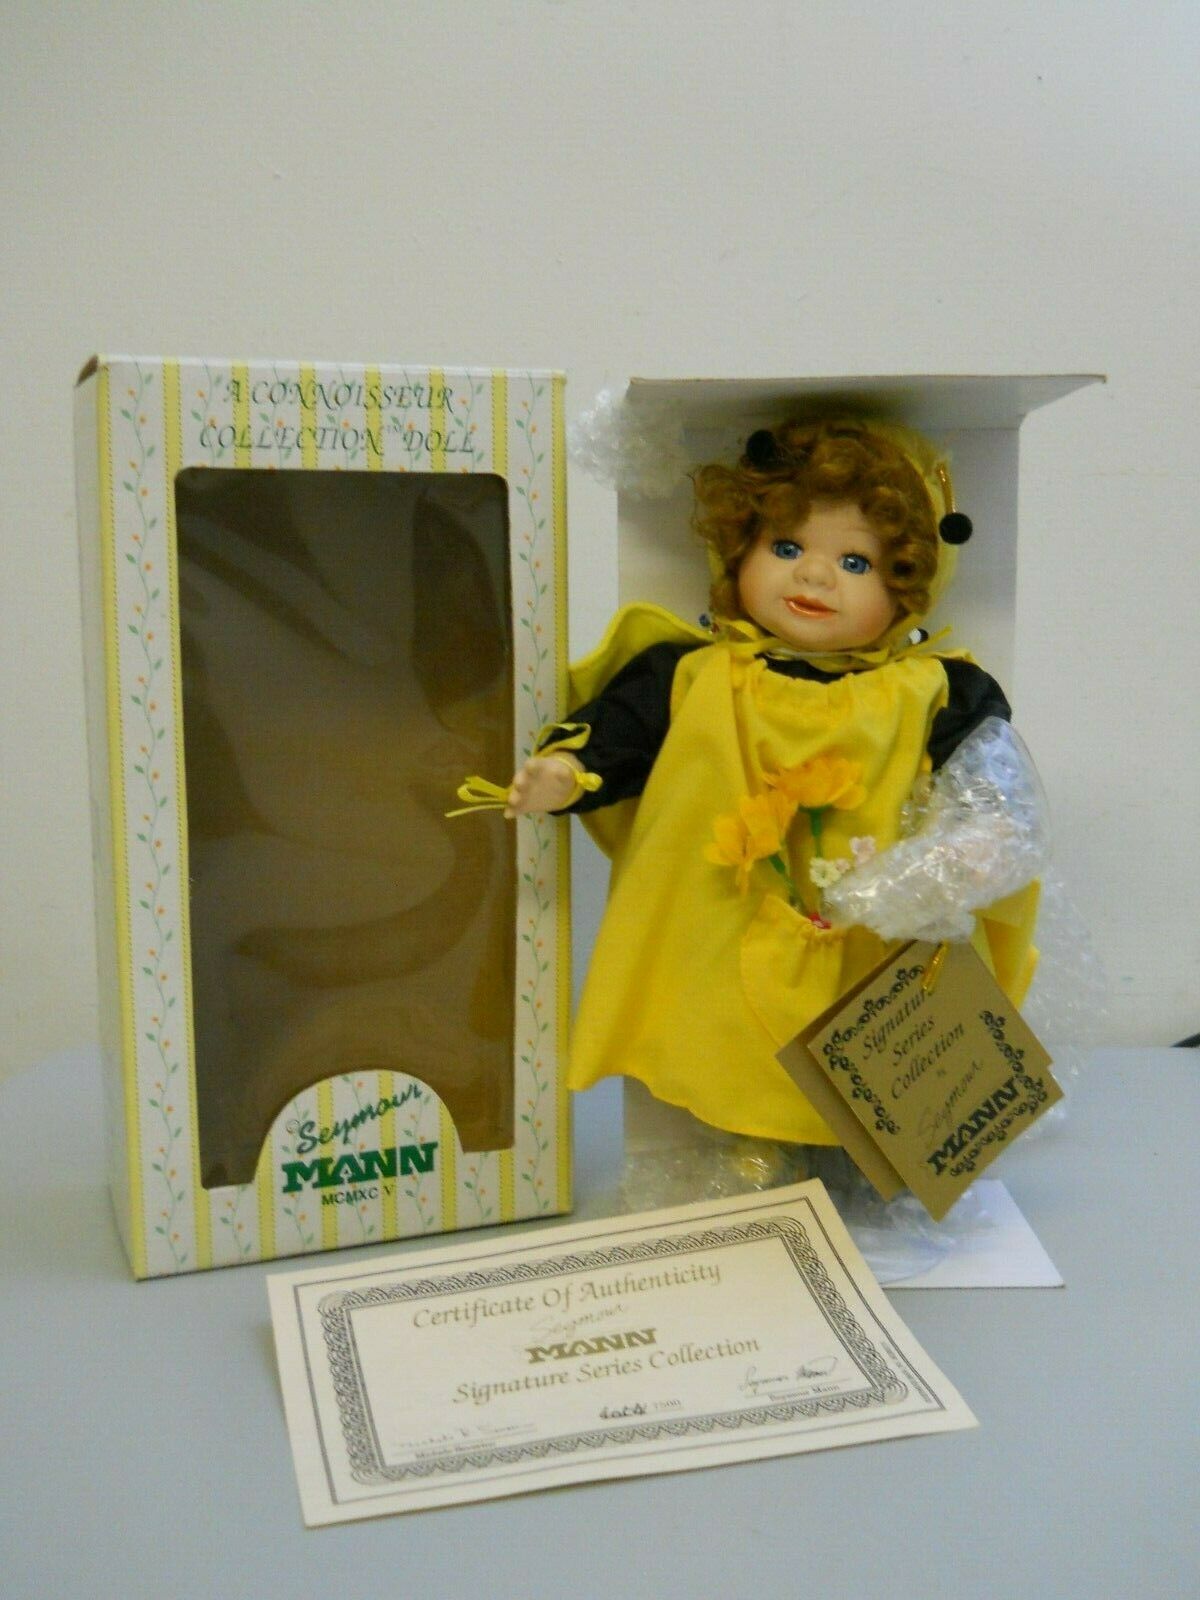 Seymour Mann Bumble Bee Baby Porcelain Doll Connoisseur Collection Box